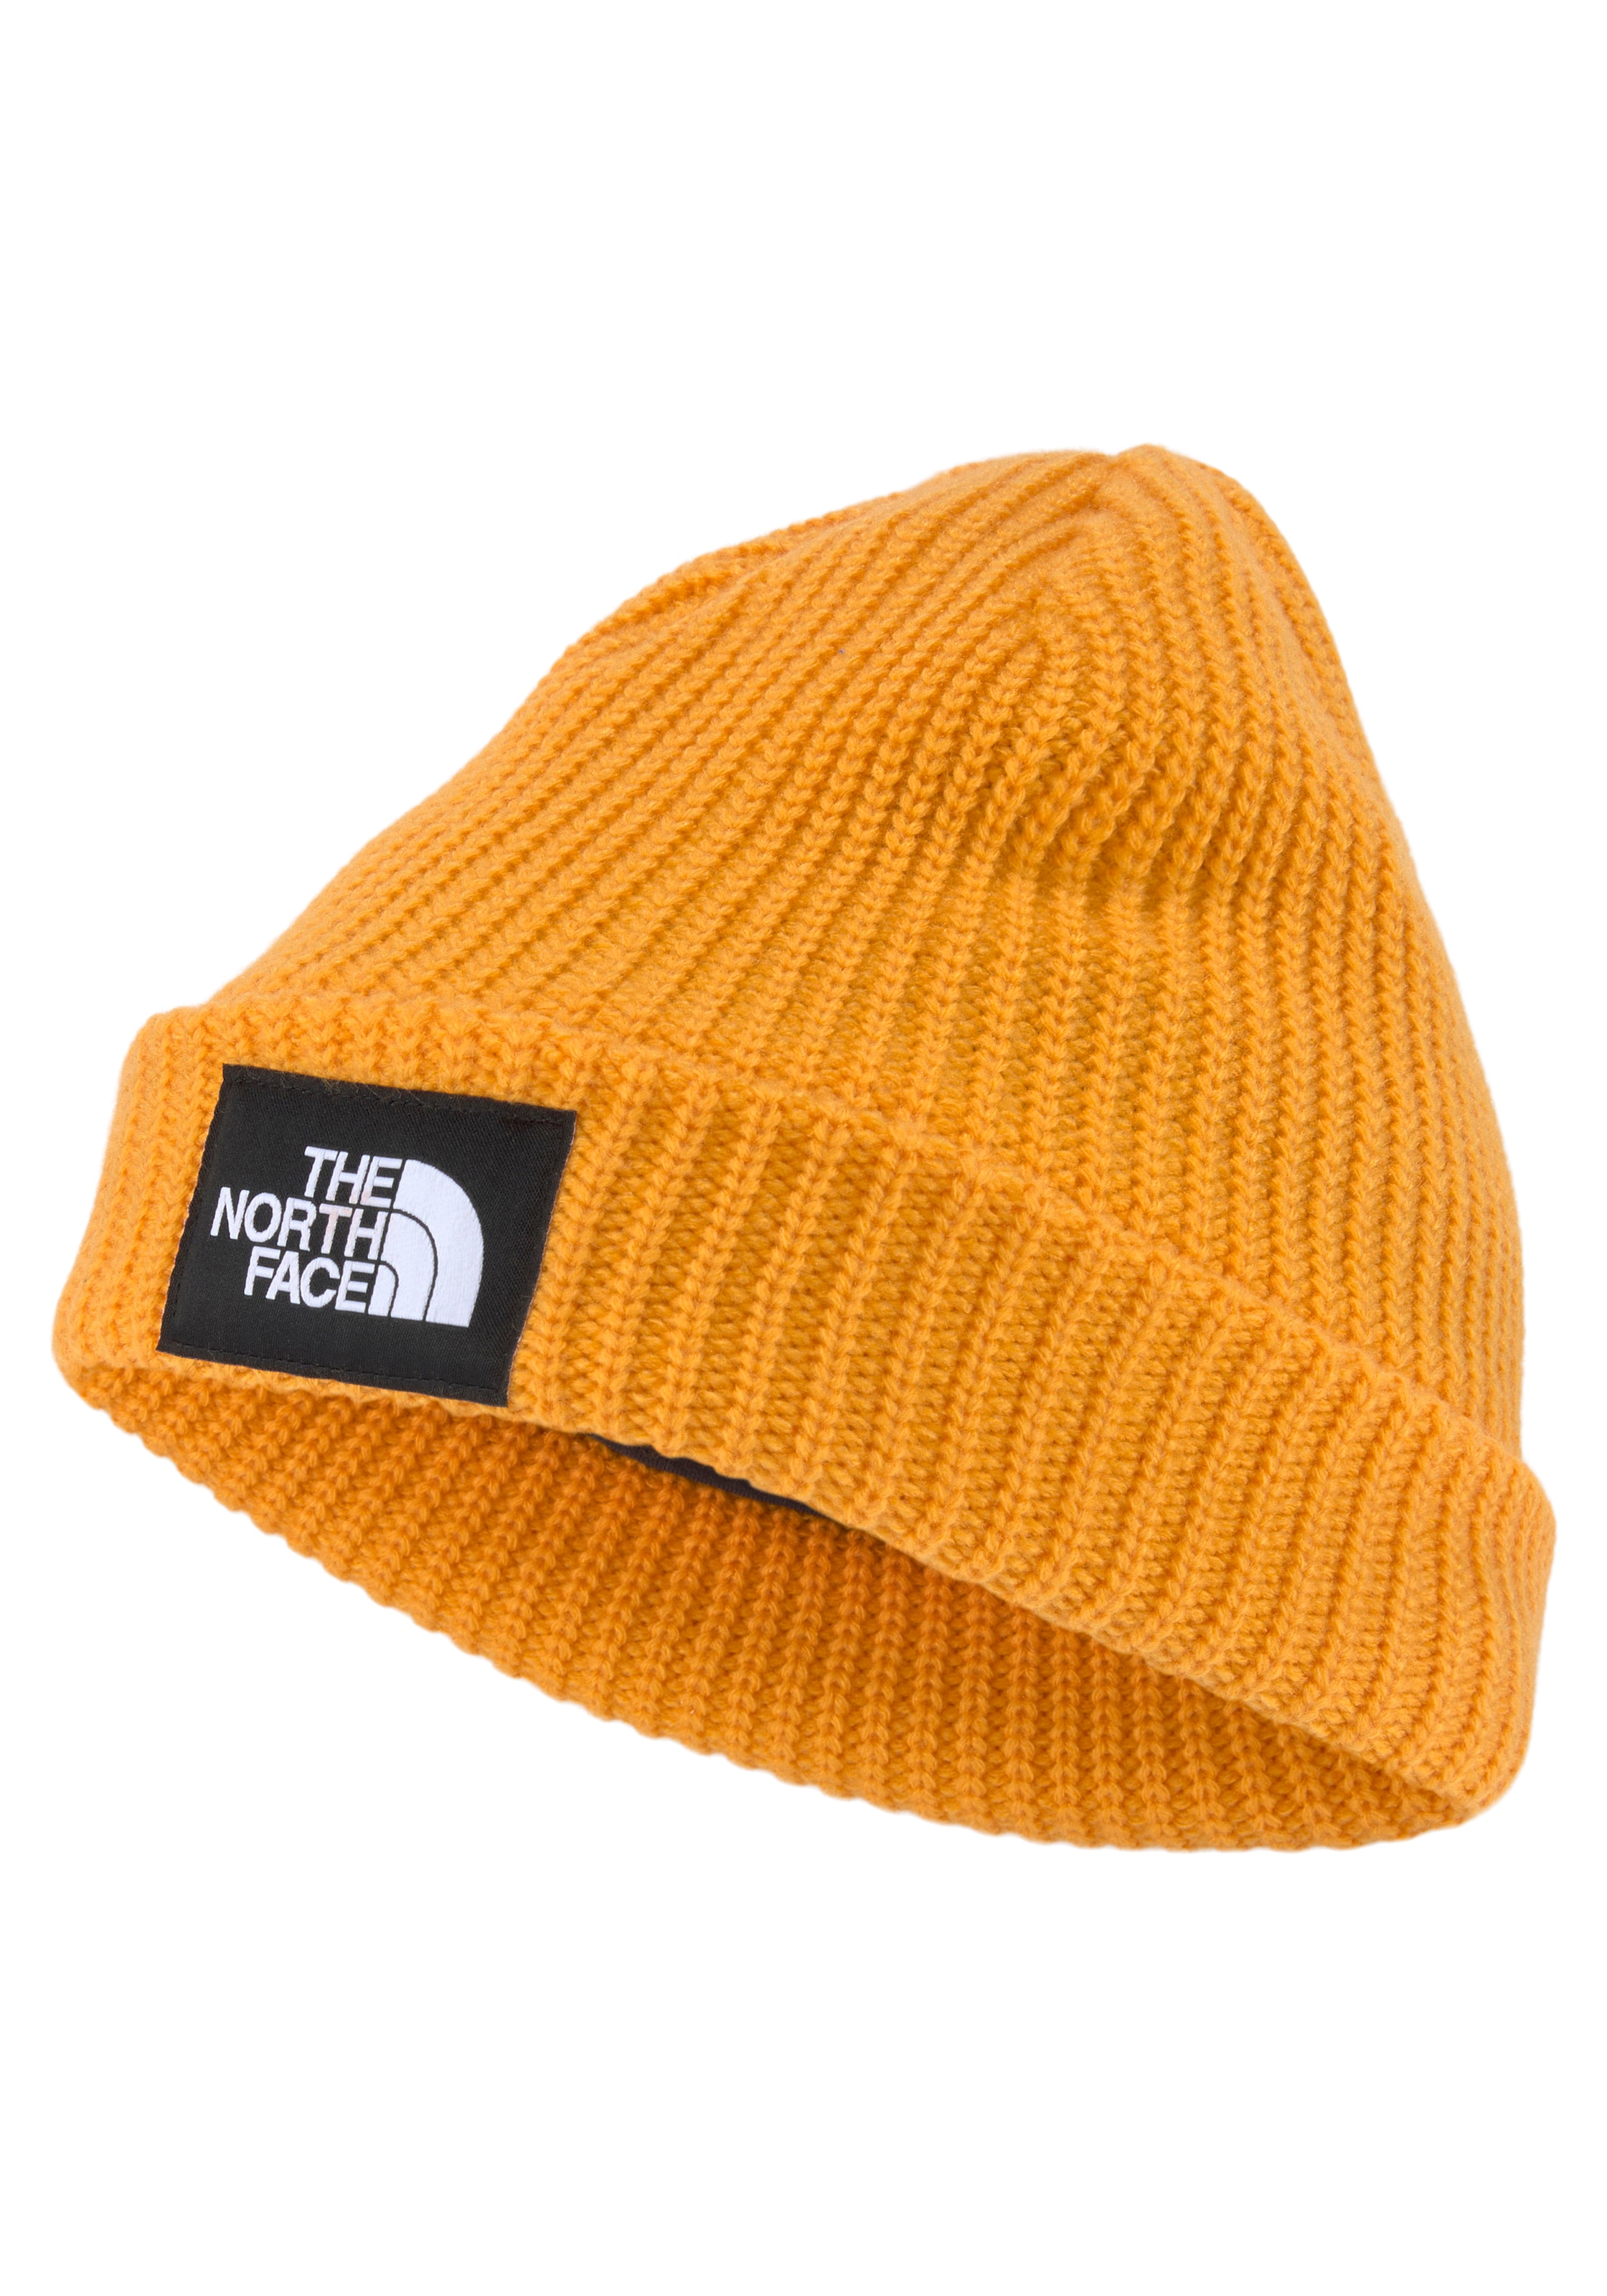 The North Logolabel Beanie BEANIE«, LINED | UNIVERSAL DOG kaufen »SALTY Face mit